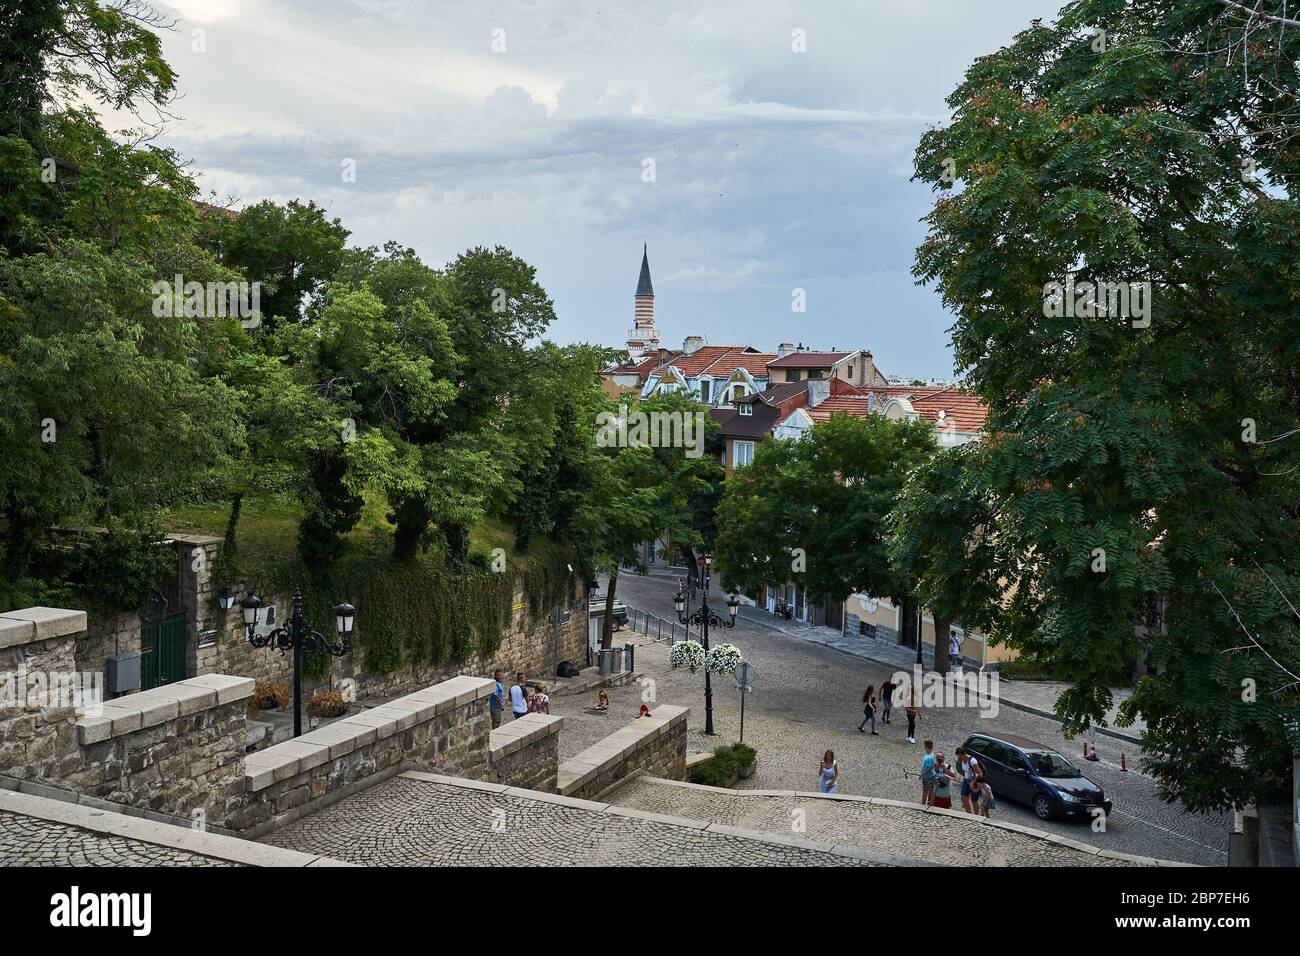 PLOVDIV, BULGARIA - JULY 02, 2019: The view on the city. Plovdiv is the second largest city in Bulgaria. Stock Photo